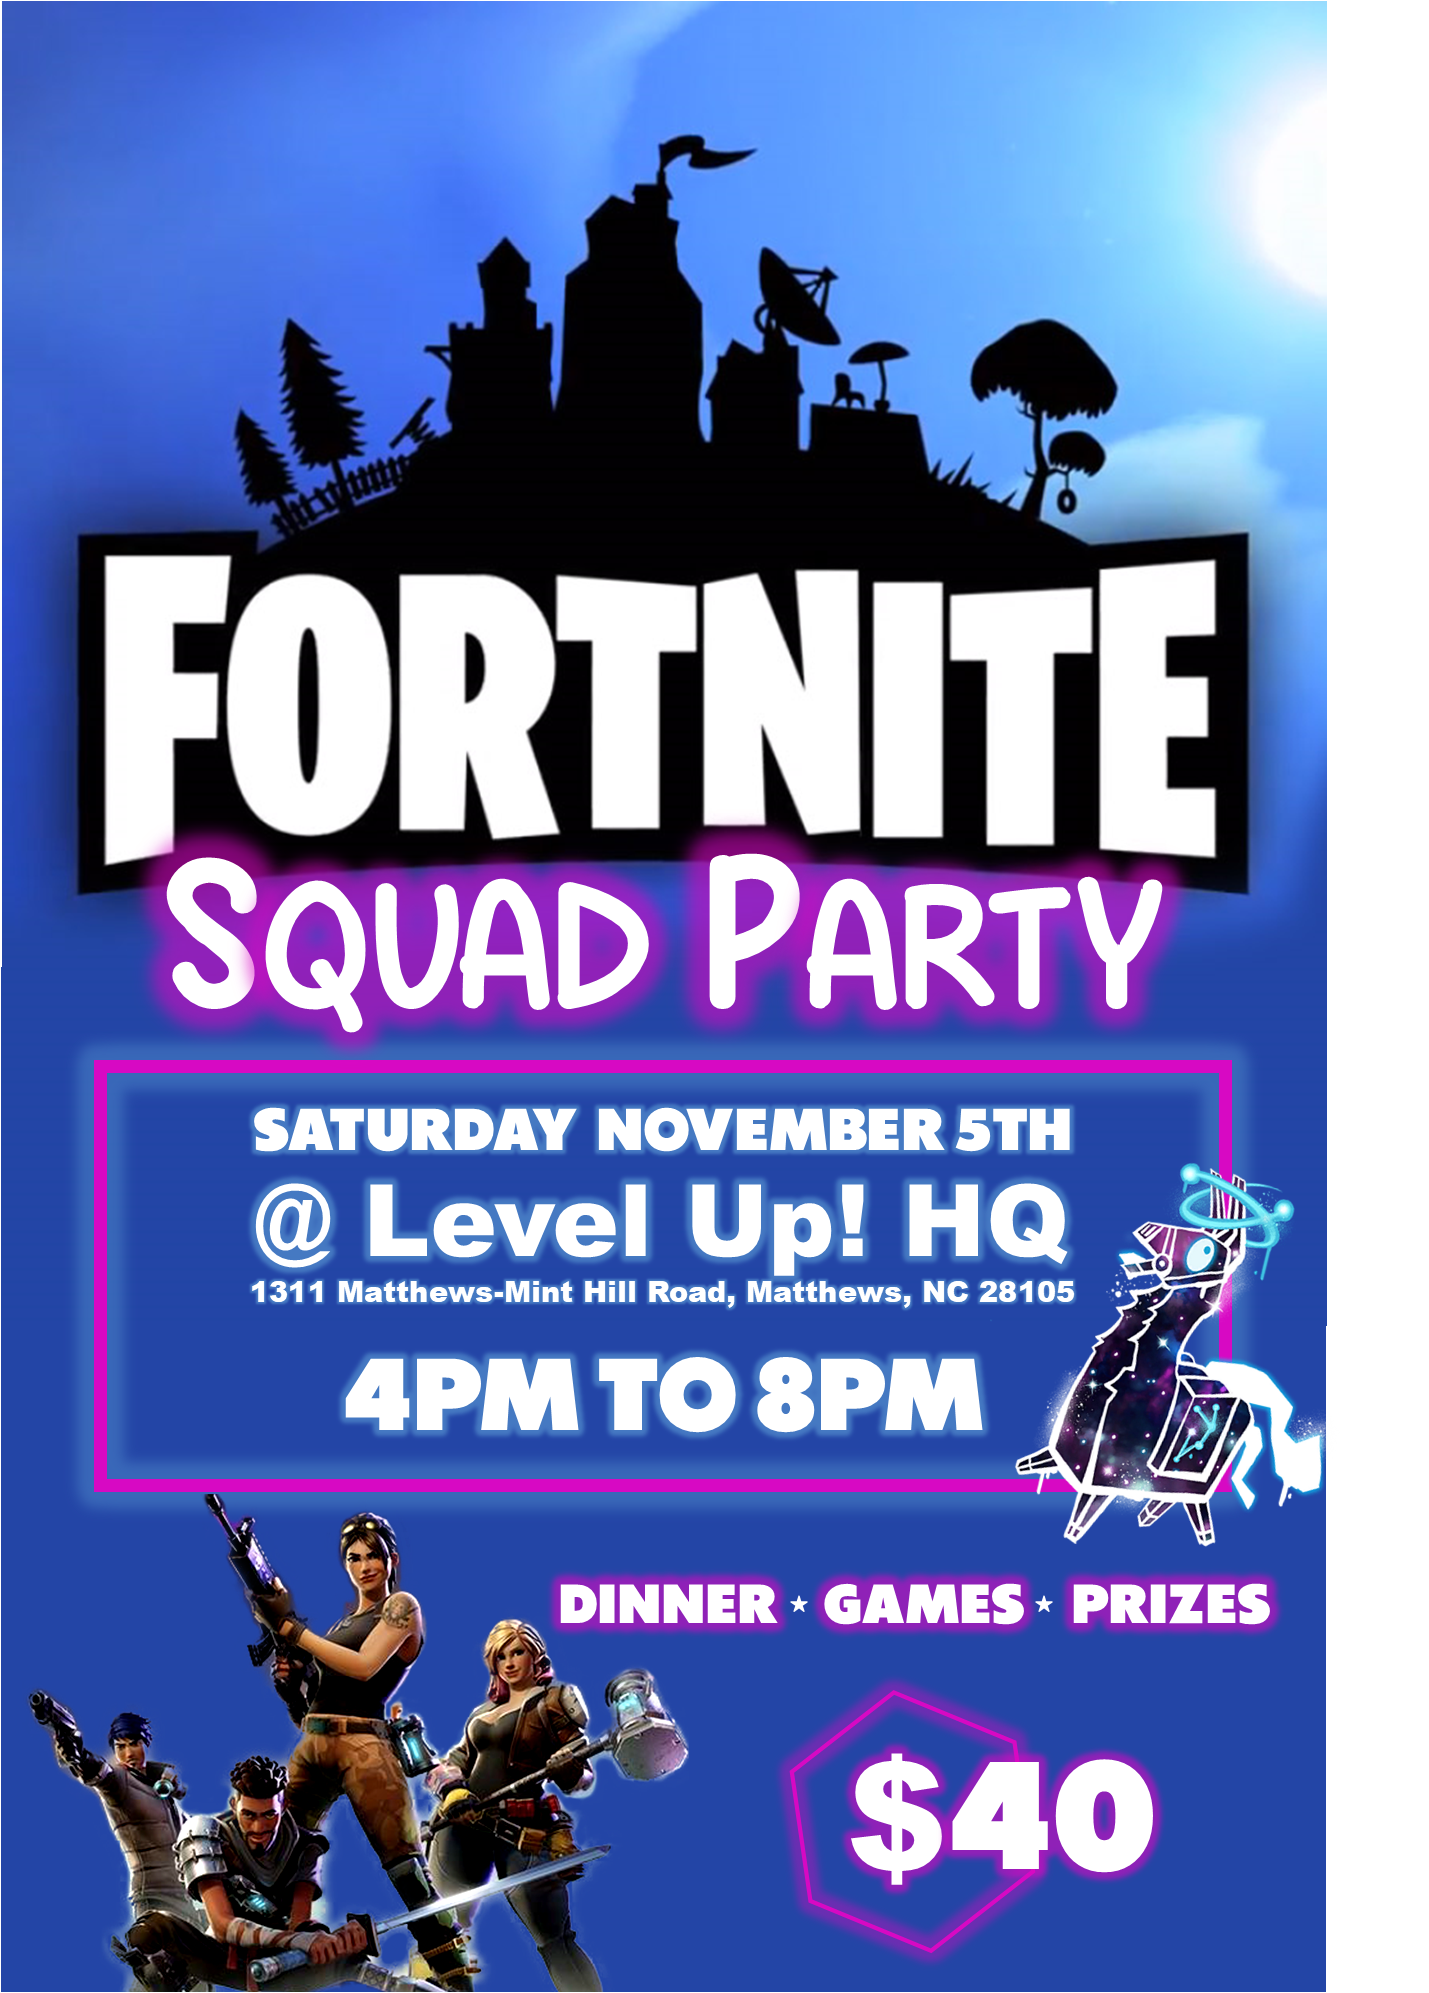 Fortnite Squad Party Flyer